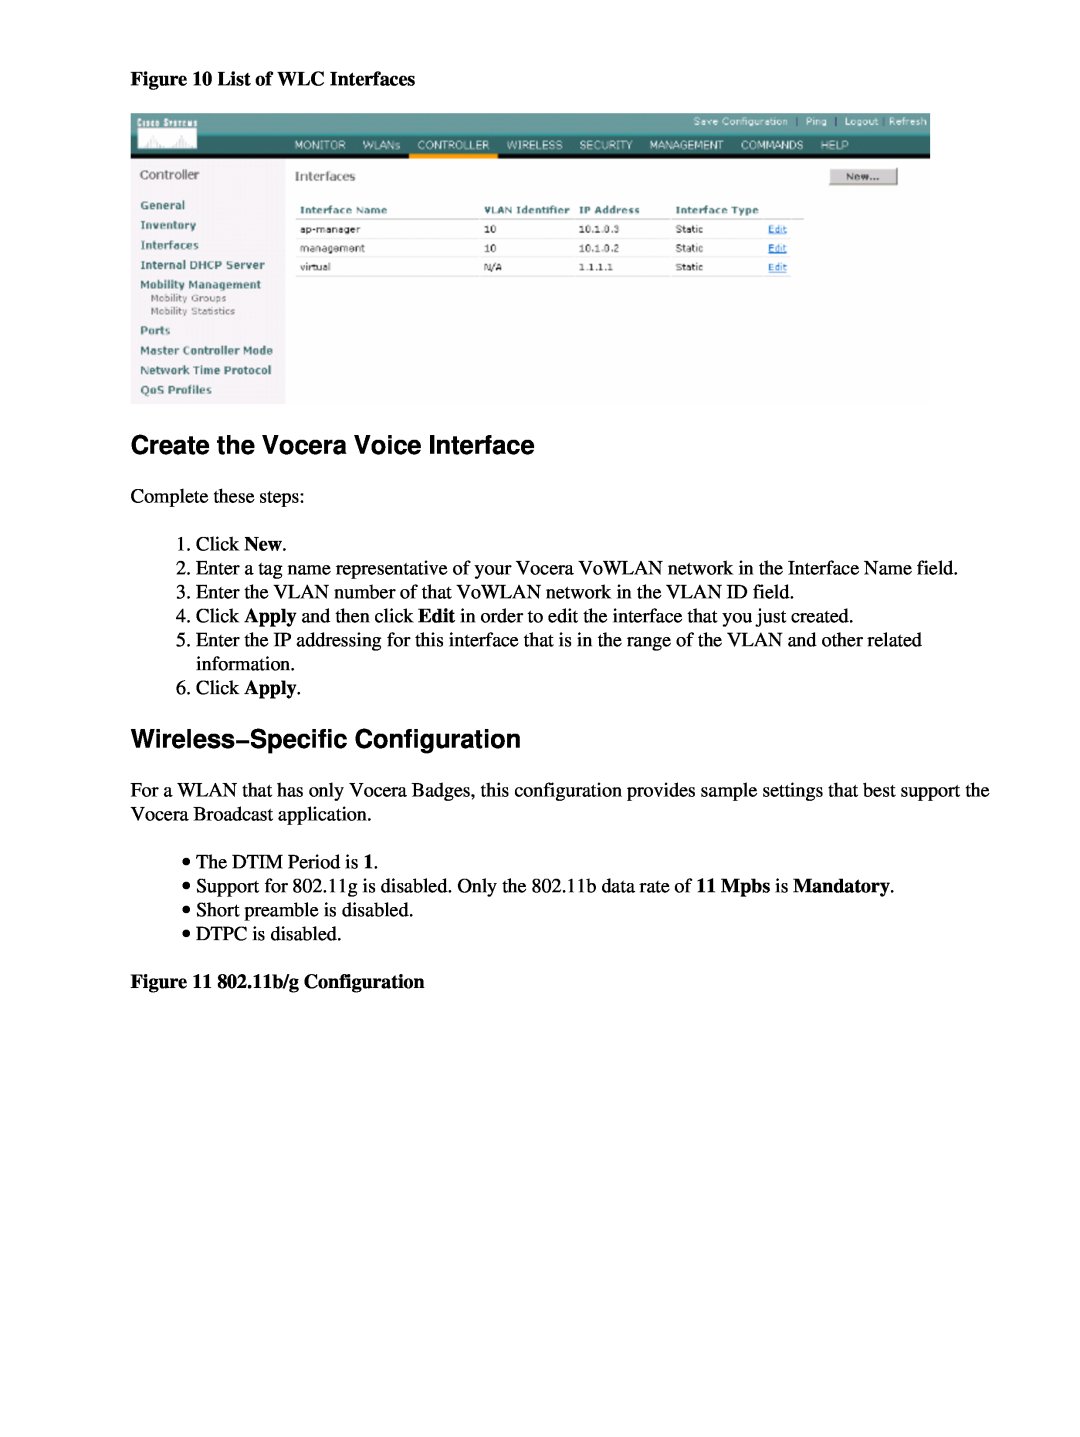 Cisco Systems 71642 manual Create the Vocera Voice Interface, Wireless−Specific Configuration, List of WLC Interfaces 